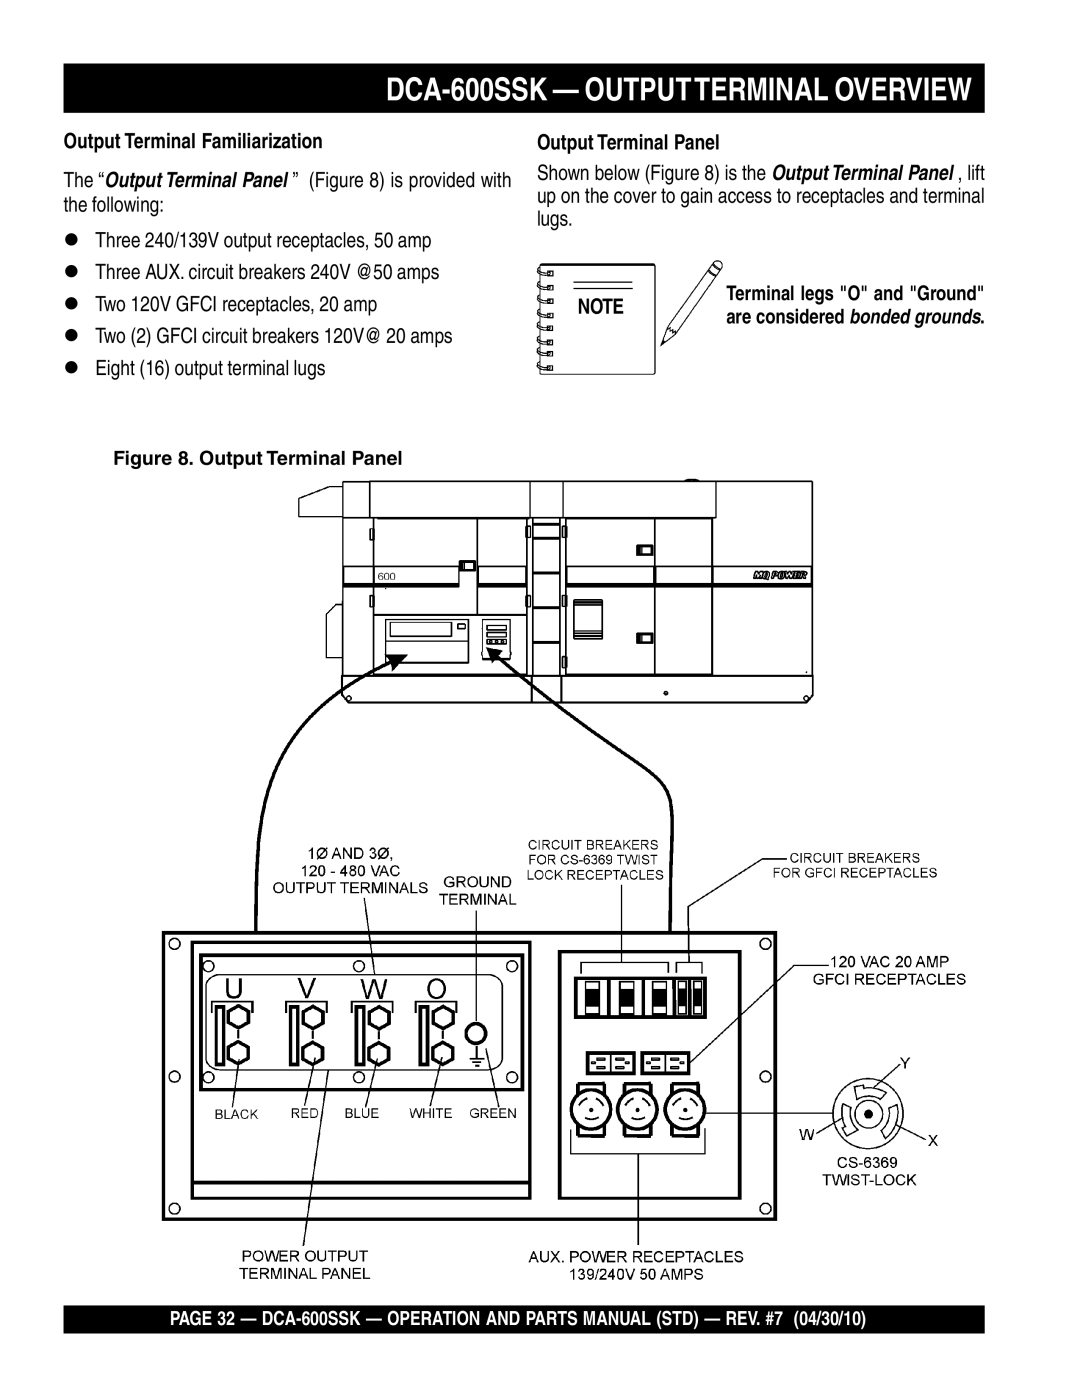 Multiquip operation manual DCA-600SSK - OUTPUTTERMINAL OVERVIEW, Output Terminal Familiarization, Output Terminal Panel 